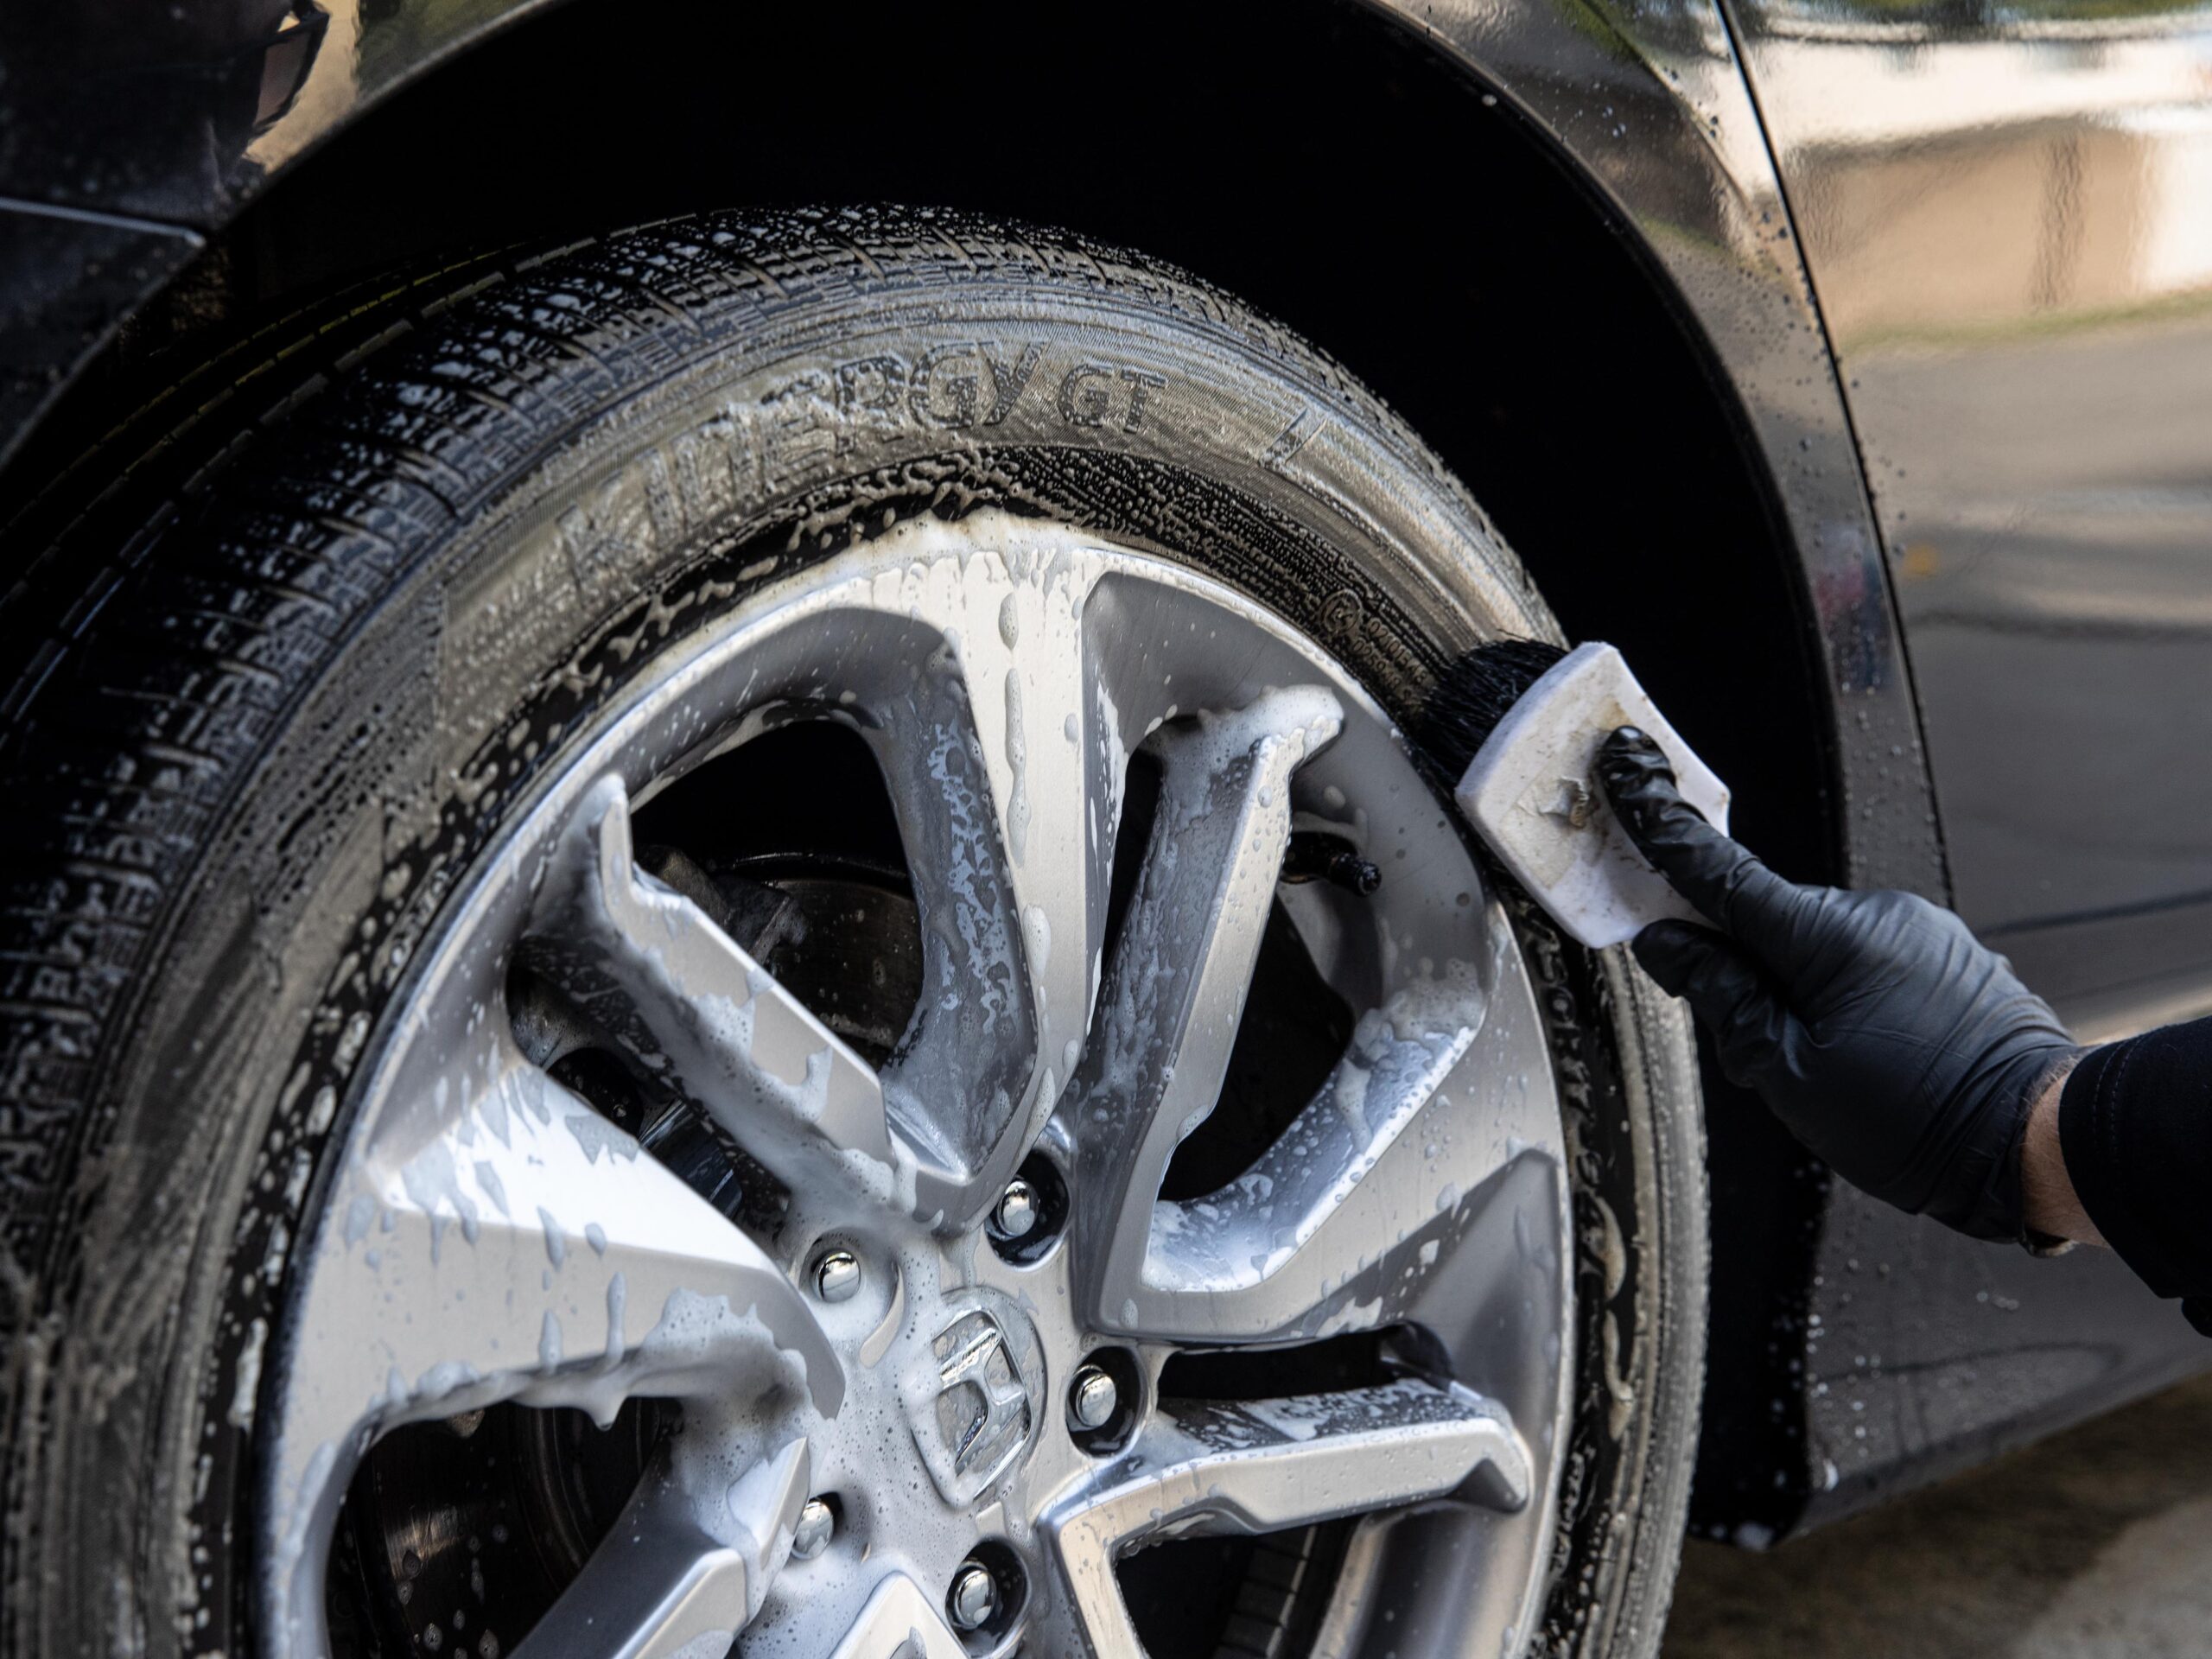 Meguiar’s Hot Rims Wheel and Tire Cleaner